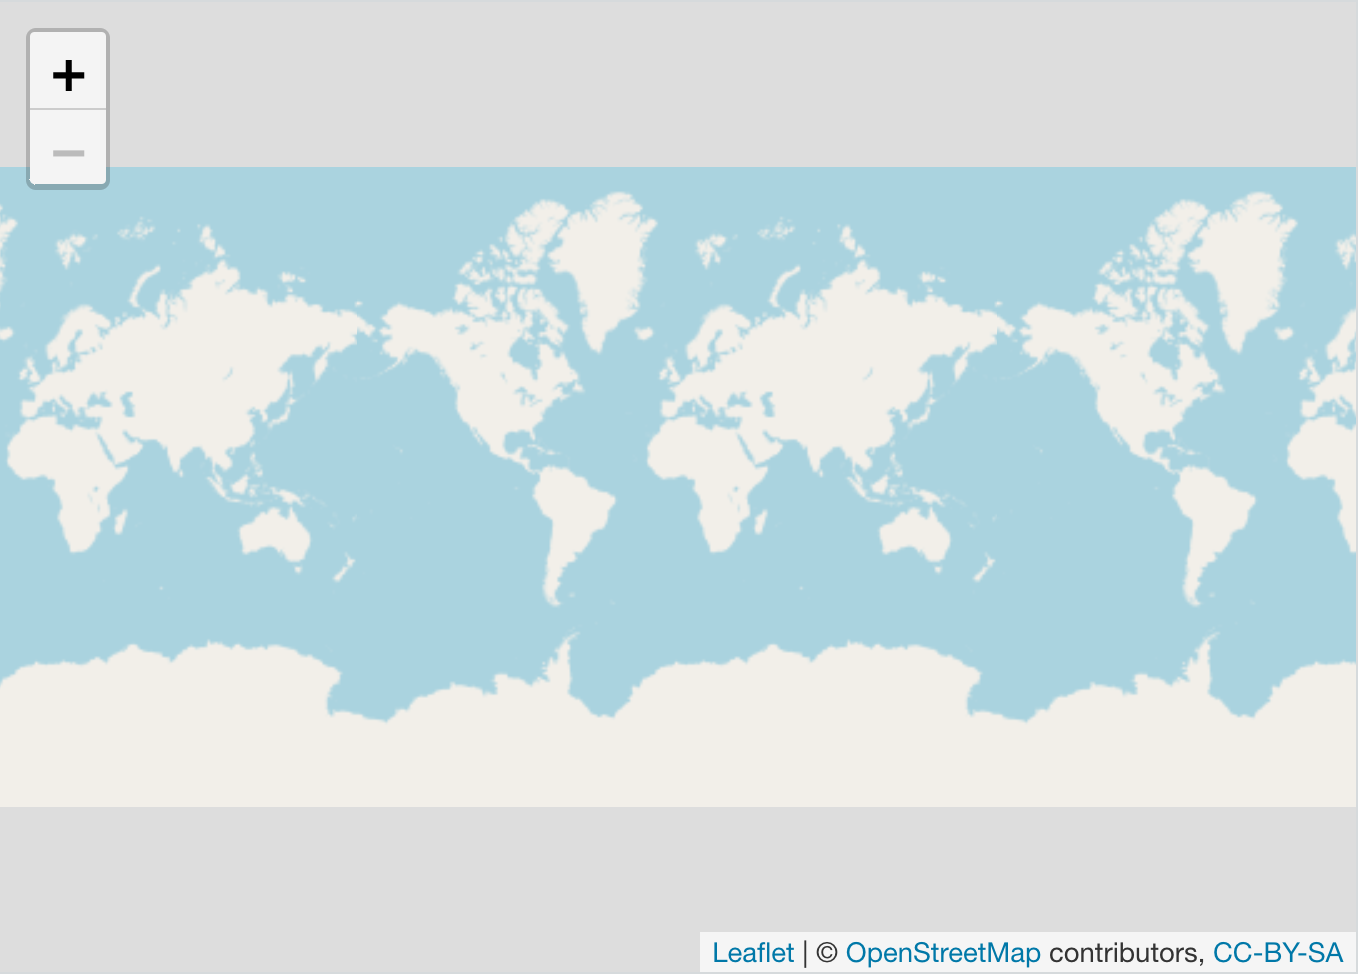 A featureless world map in the Mercator projection is zoomed out to an extent where continents repeat. The top left has plus and minus buttons meant for zooming. The bottom right contains the text 'Leaflet', in addition to a copyright notice.